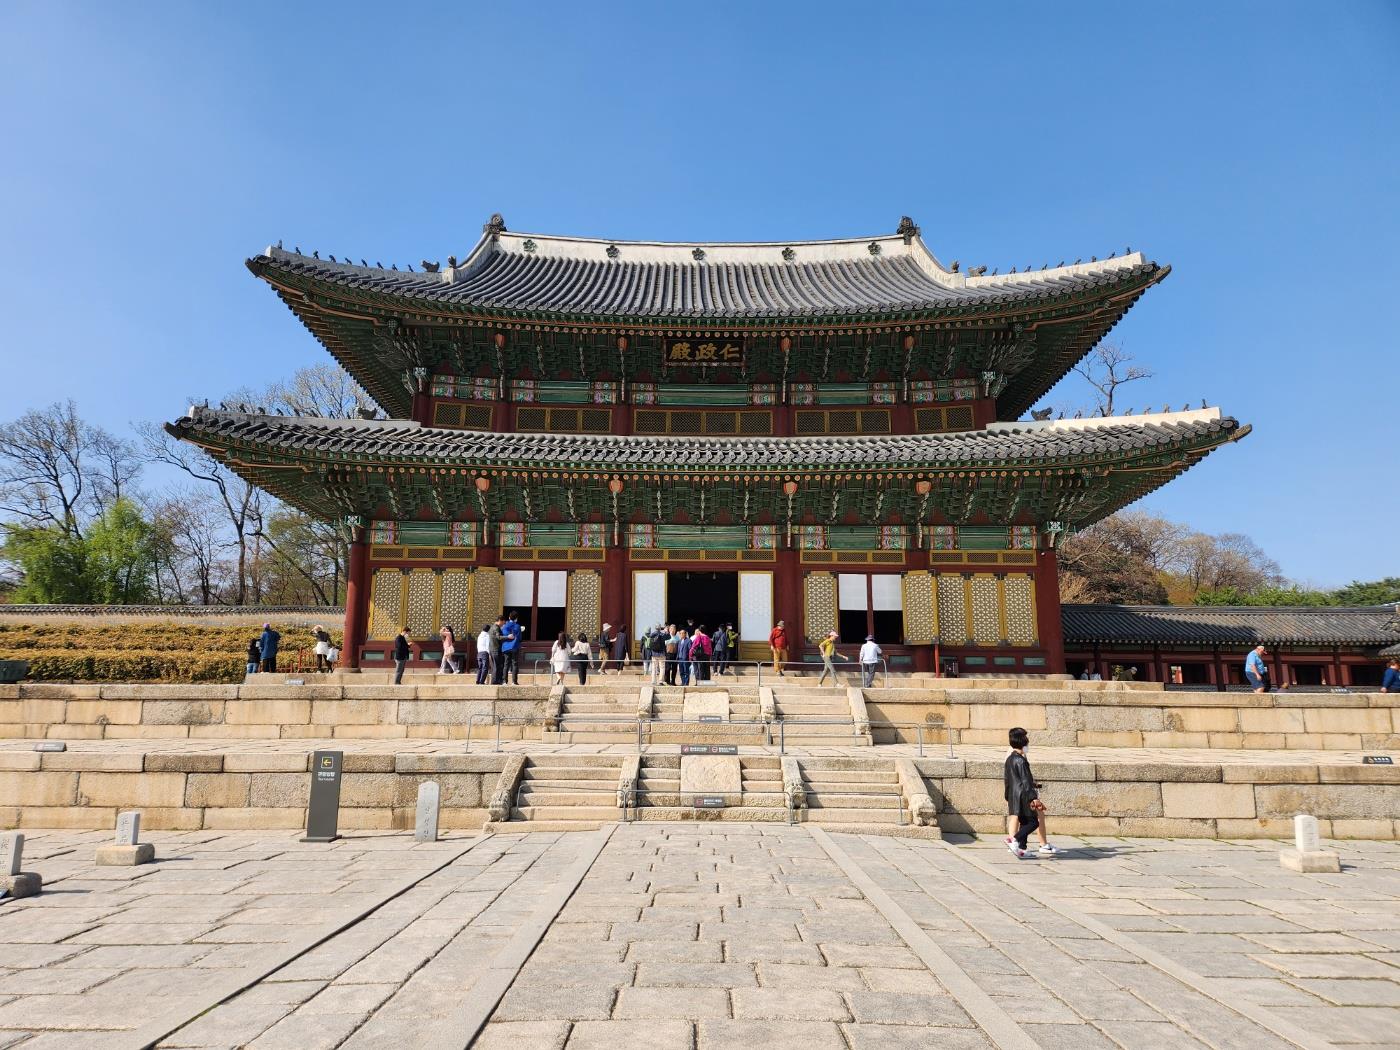 The main entrance of Changdeok Palace.